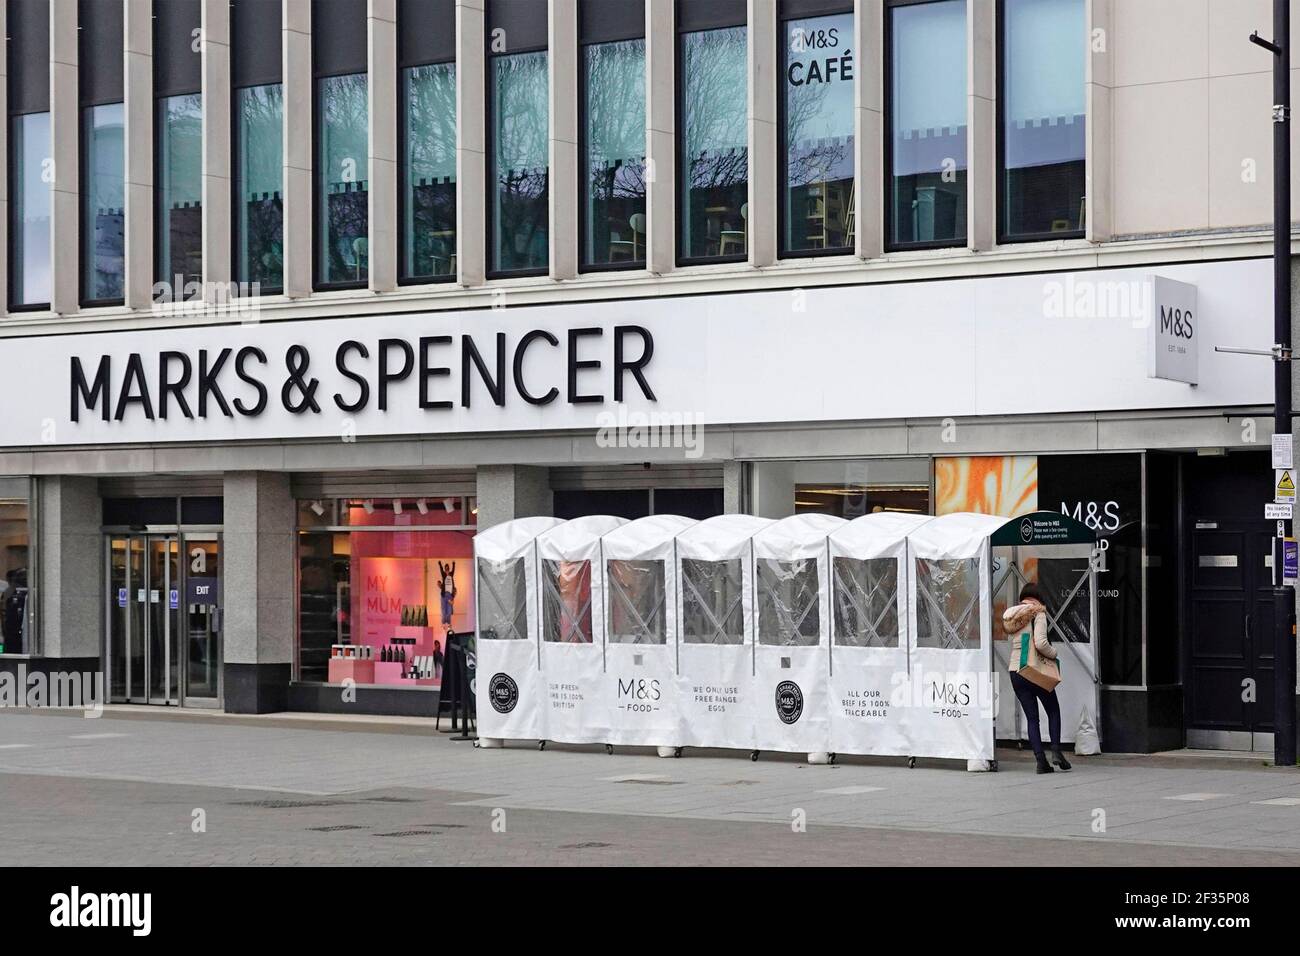 Marks and Spencer shop front & collapsible all weather shopper queue shelter one way M&S store entrance for coronavirus corvid 19 pandemic Essex uk Stock Photo